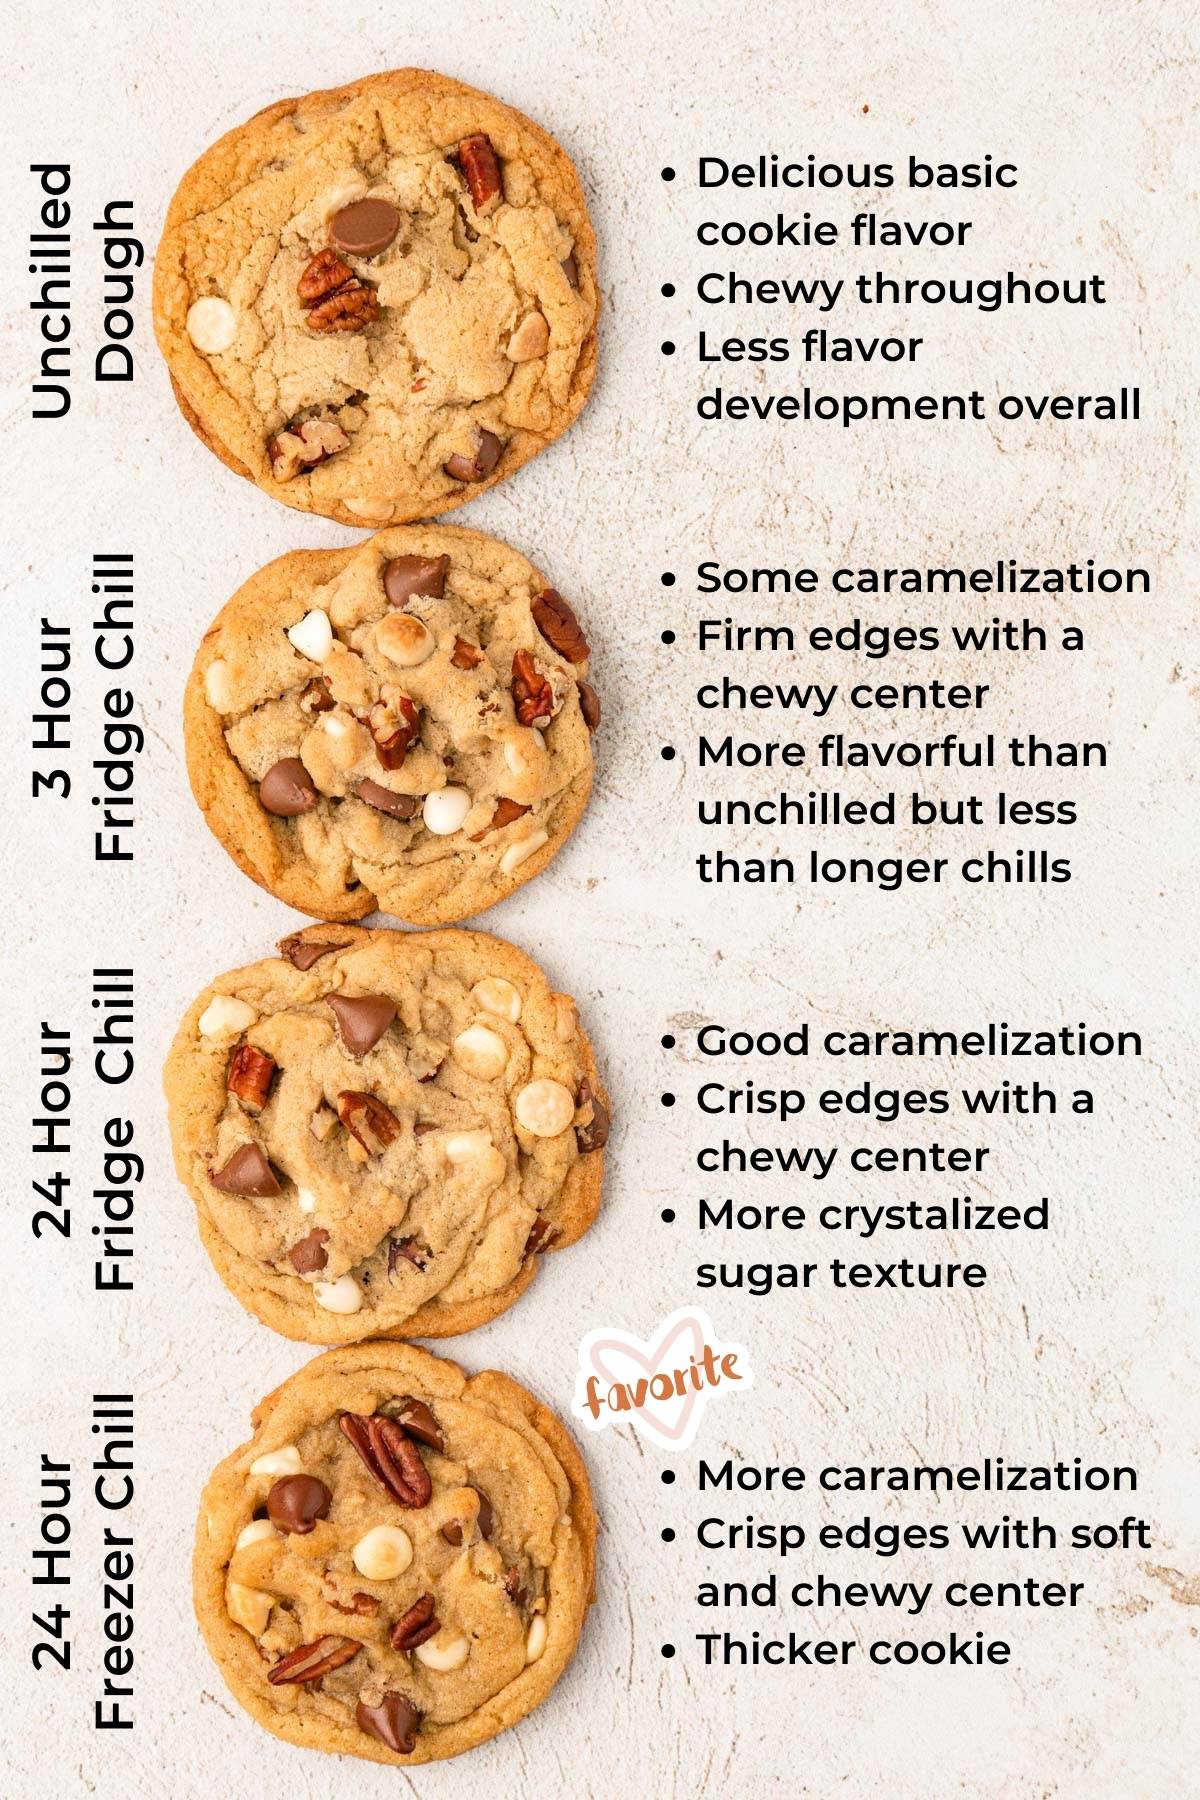 A chart showing the different results from chilling cookie dough.